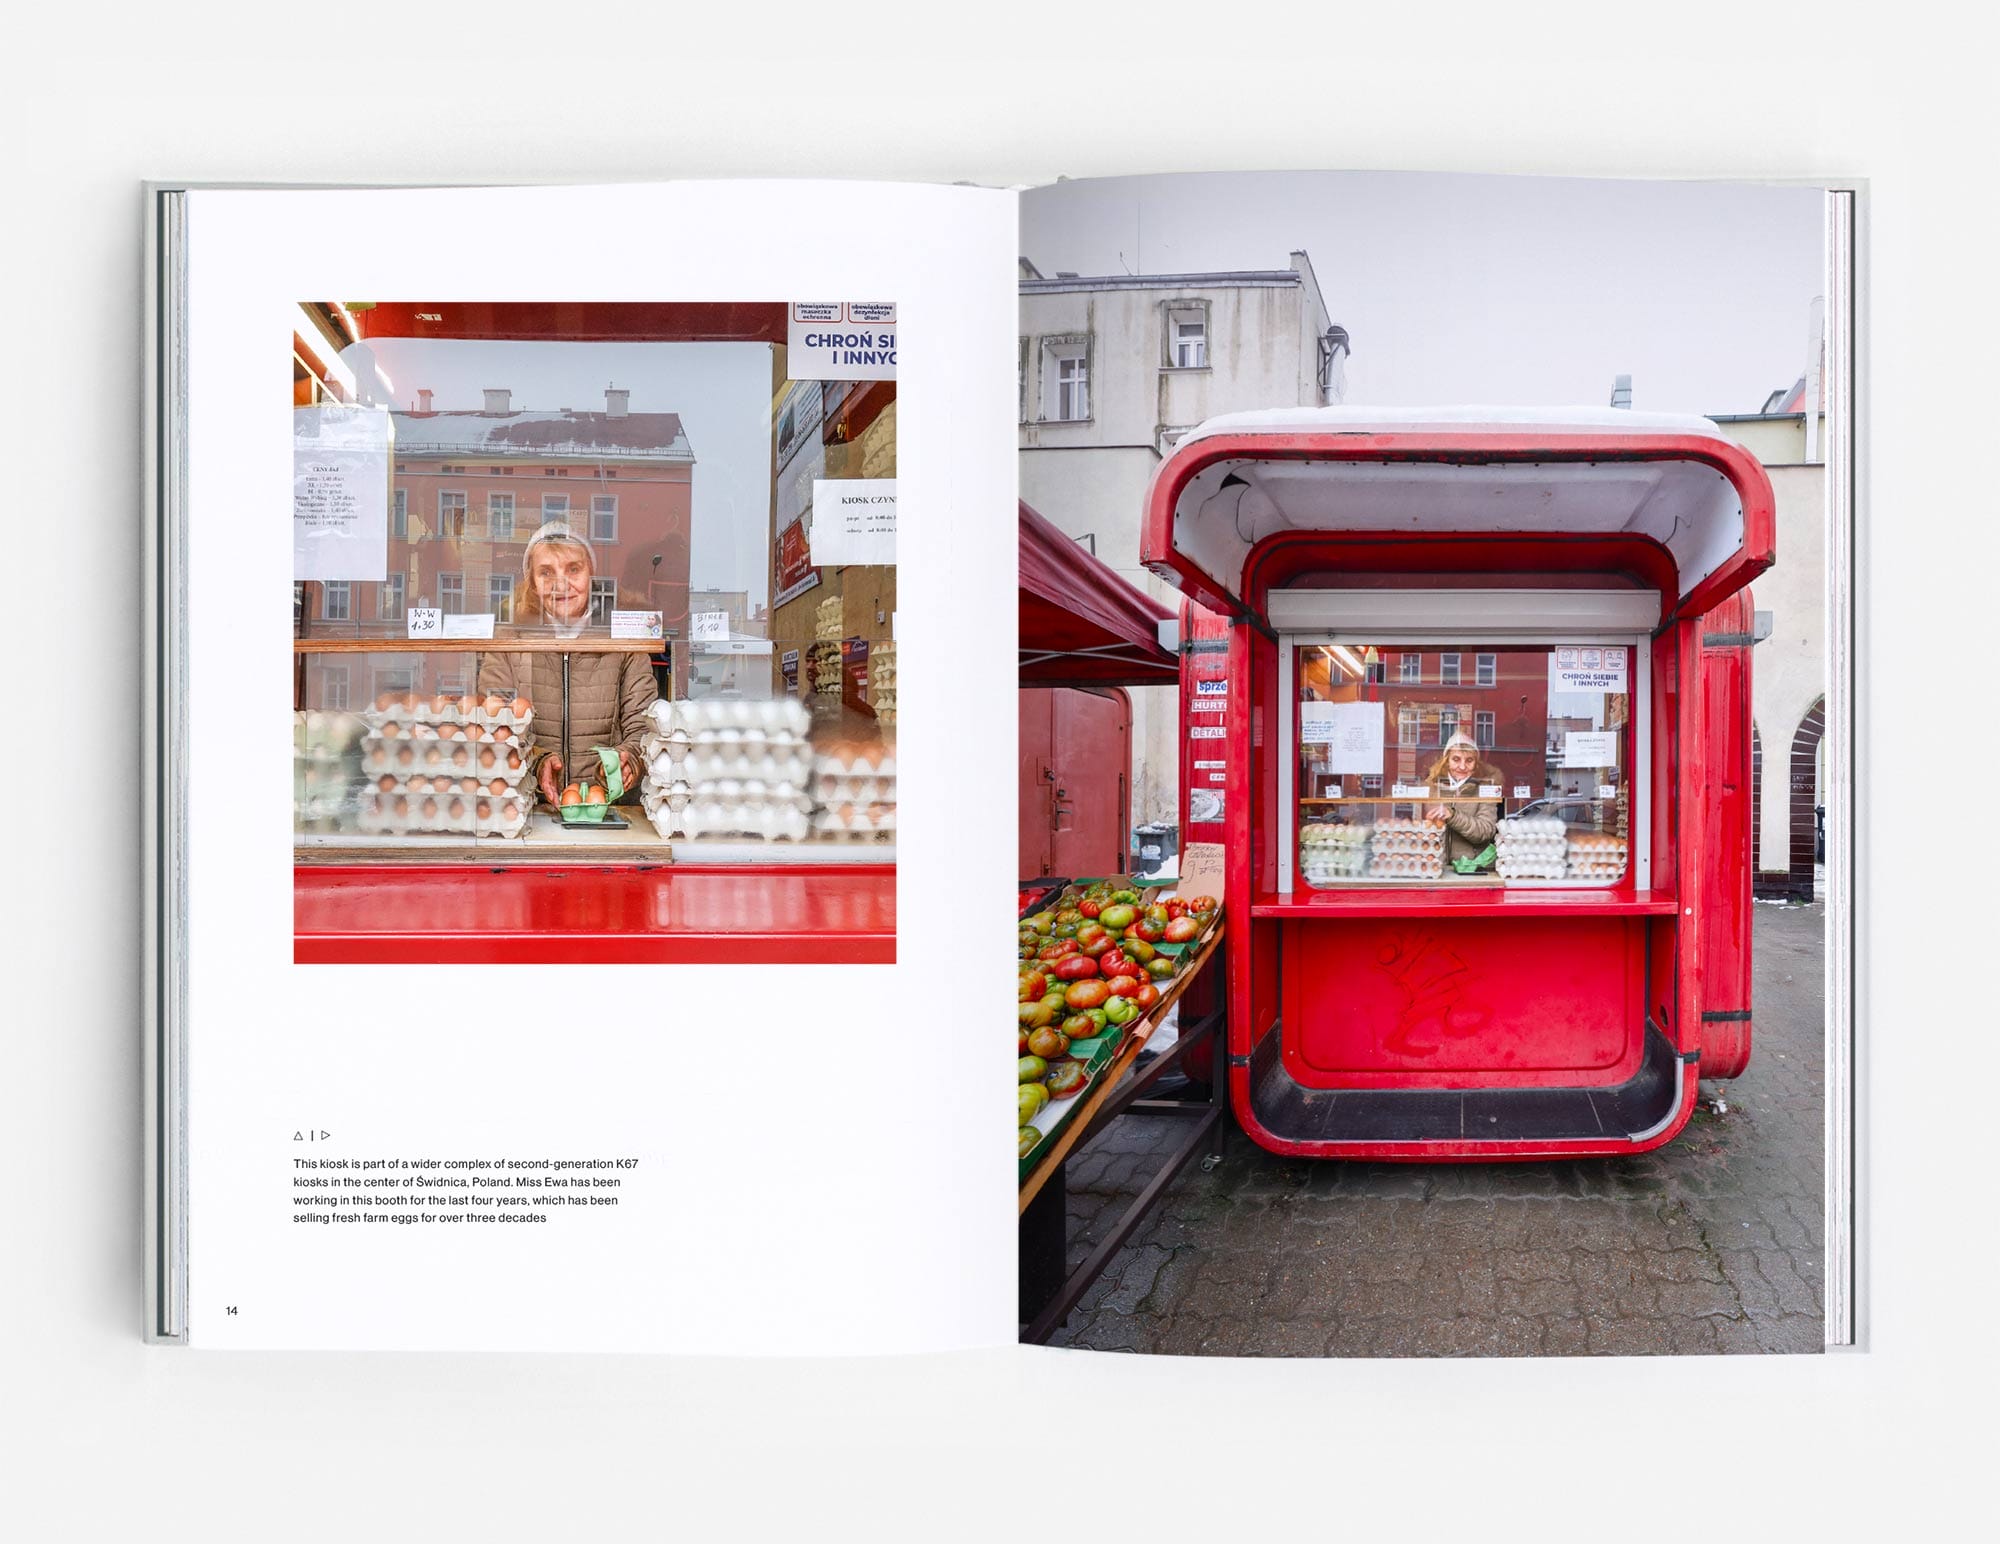 a spread from the book 'Kiosk' showing a woman standing in a bright red, modernist kiosk, selling eggs